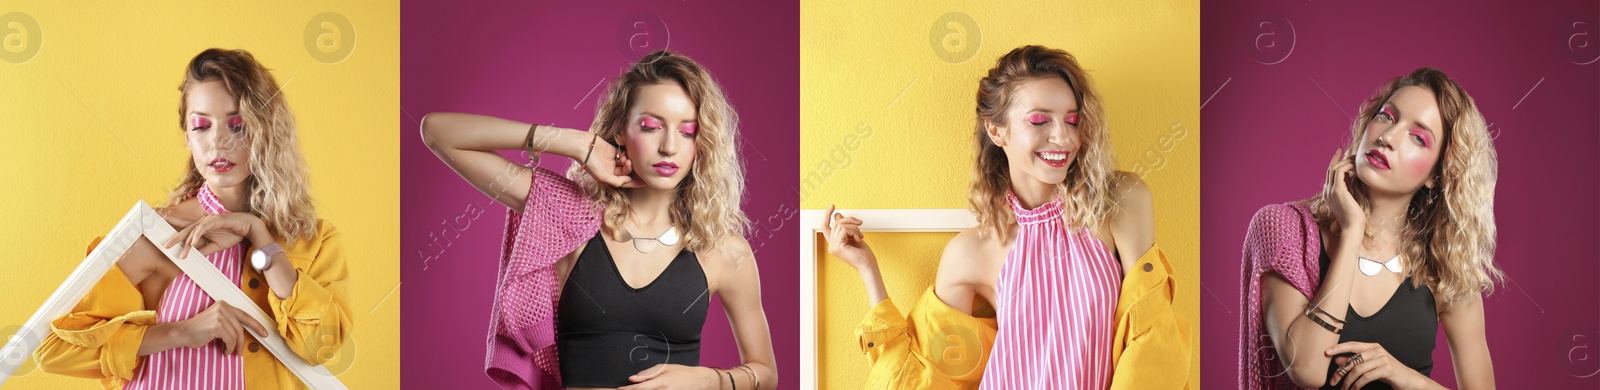 Image of Collage of beautiful young woman posing on different color backgrounds. Banner design 